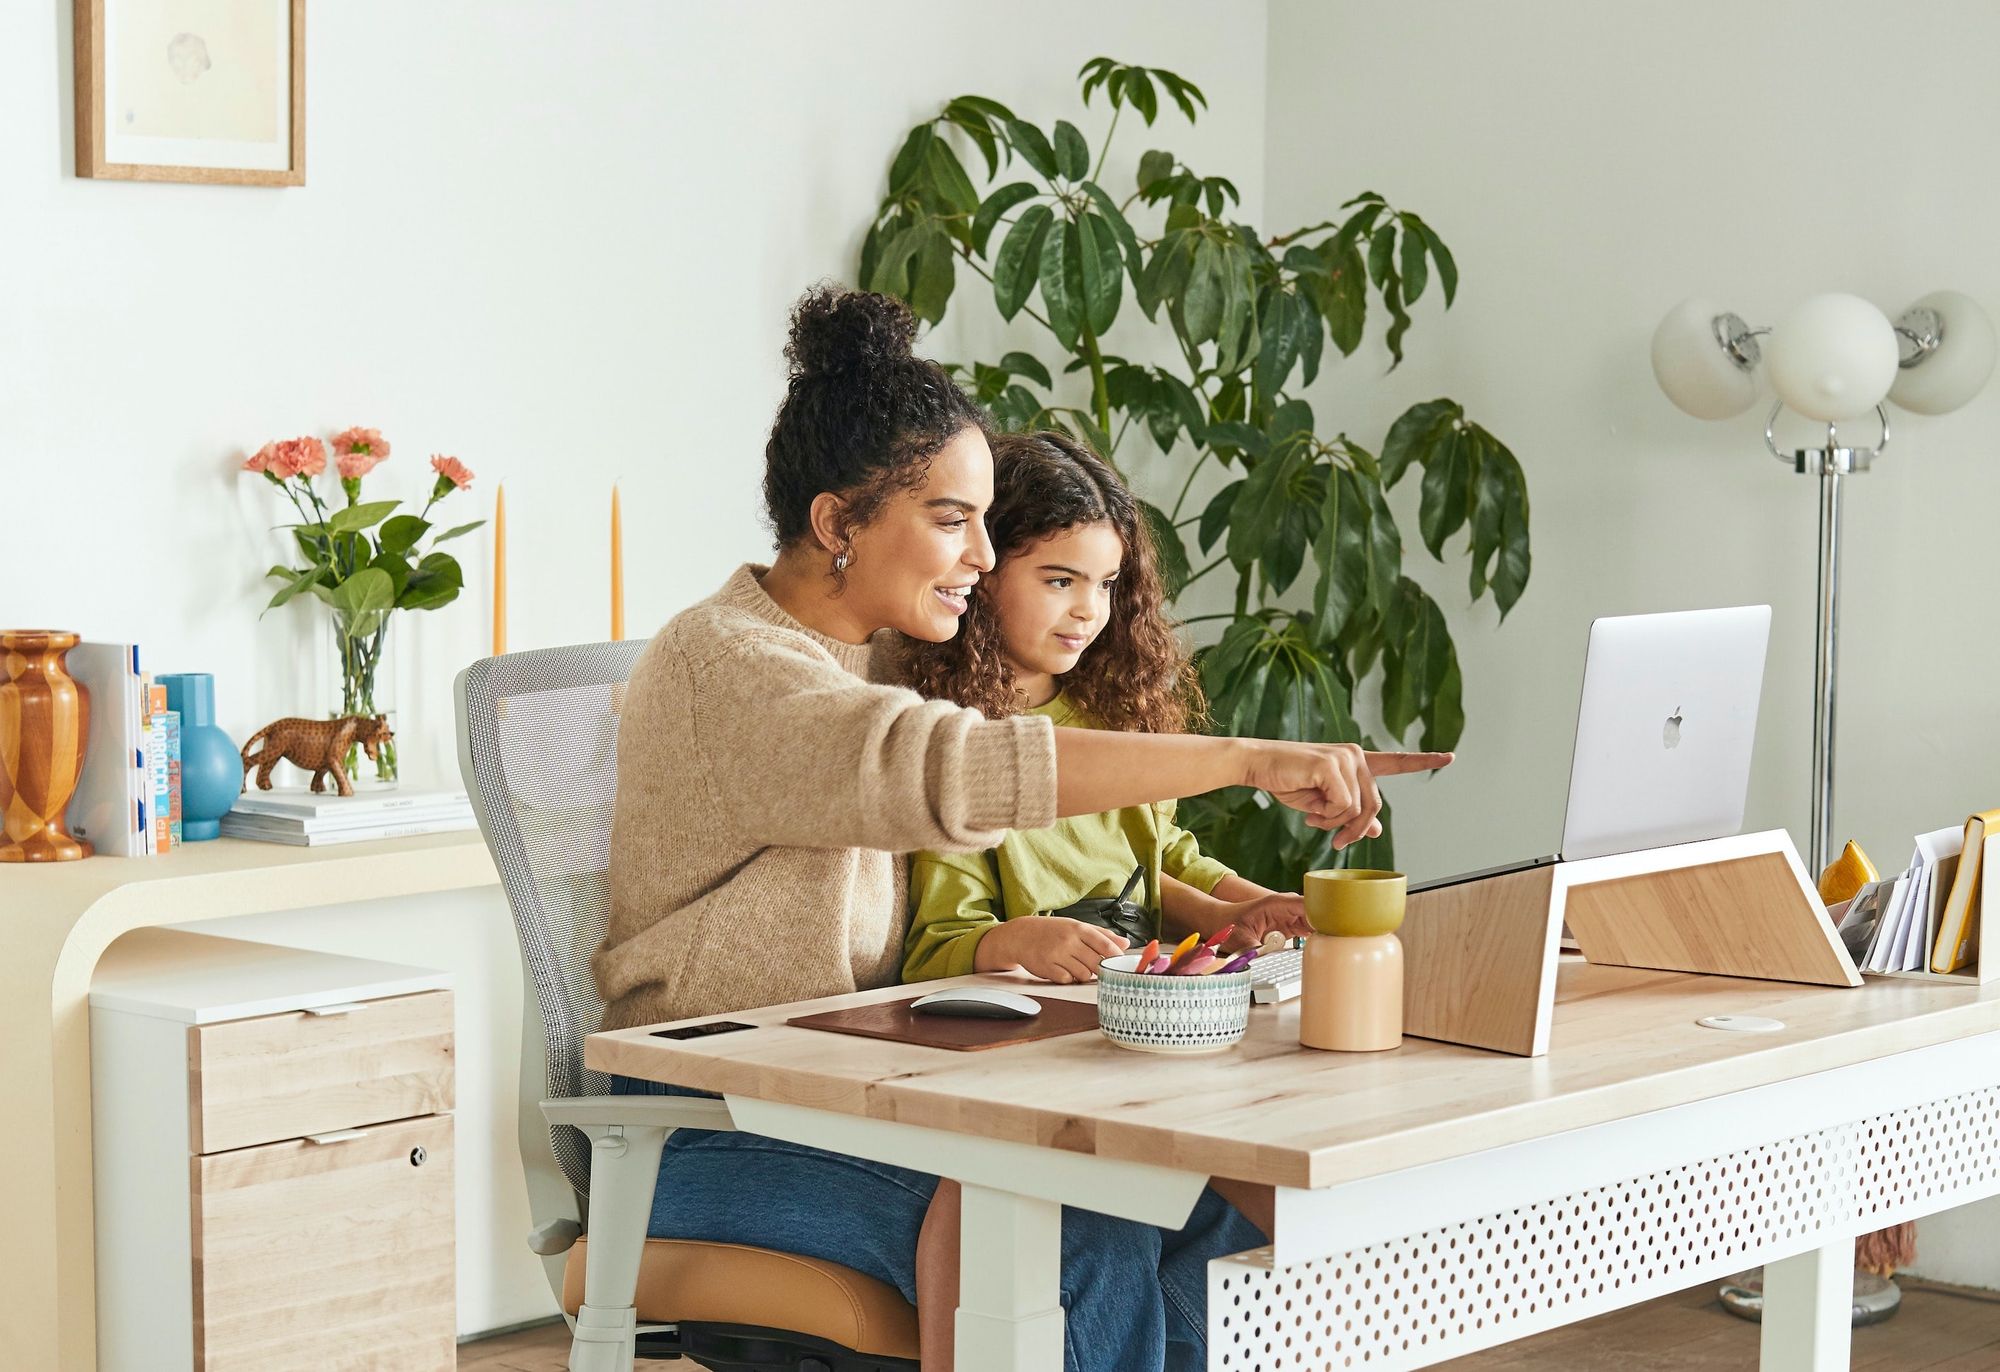 9 Great Business Ideas For Stay at Home Mom Entrepreneurs